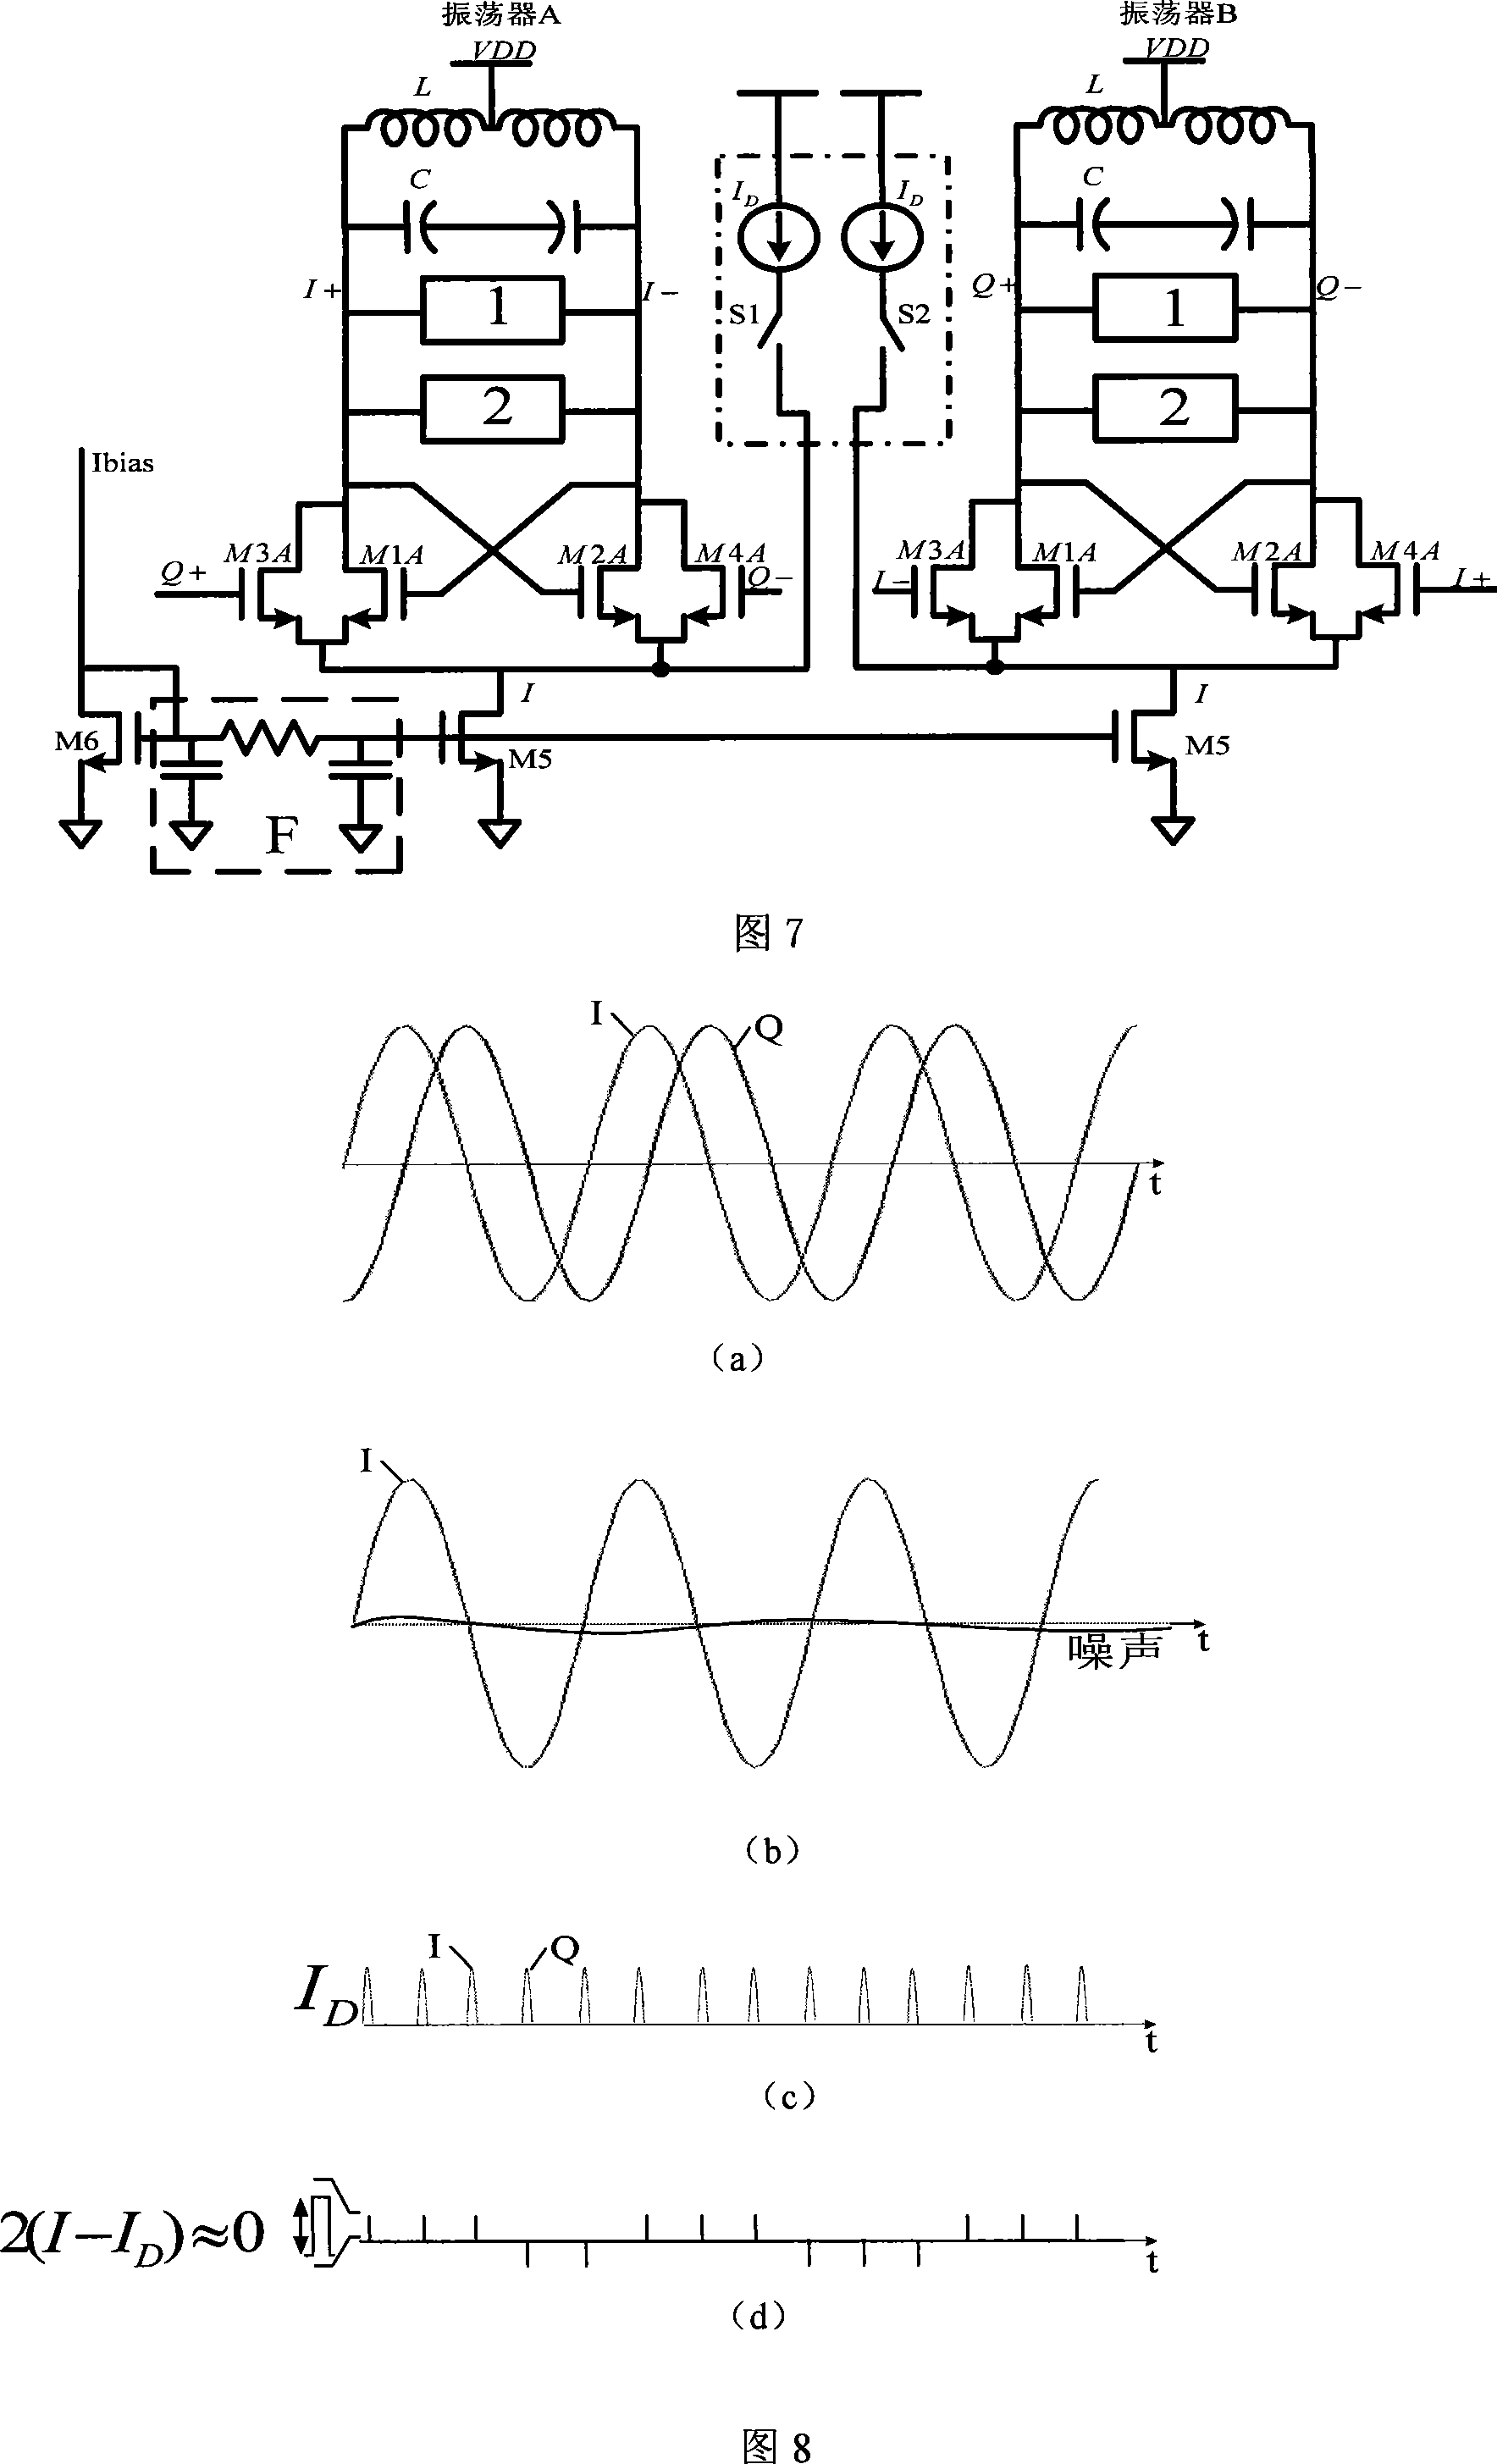 LC orthogonal voltage controlled oscillator capable of reducing flicker noise